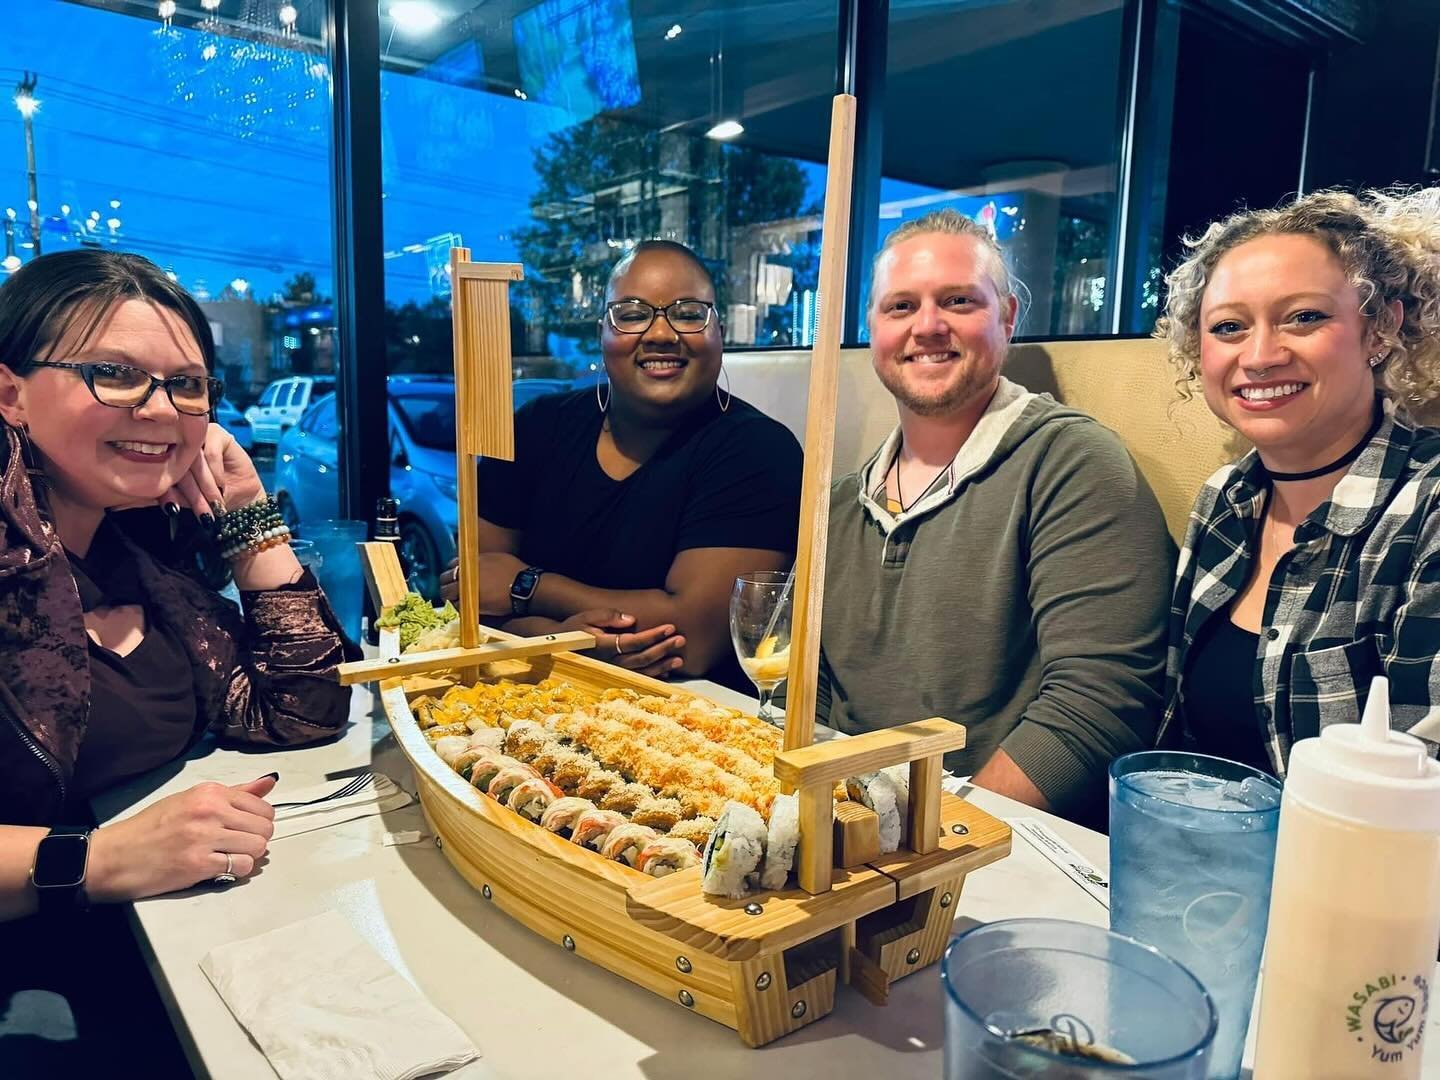 Kicked off my birthday week with something I&rsquo;ve always wanted to order&hellip; the biggest sushi boat @wasabiexpressky serves. 

Was it a ridiculous amount of sushi? YES! 

Was it an incredible evening with great friends? YES

Here&rsquo;s to m